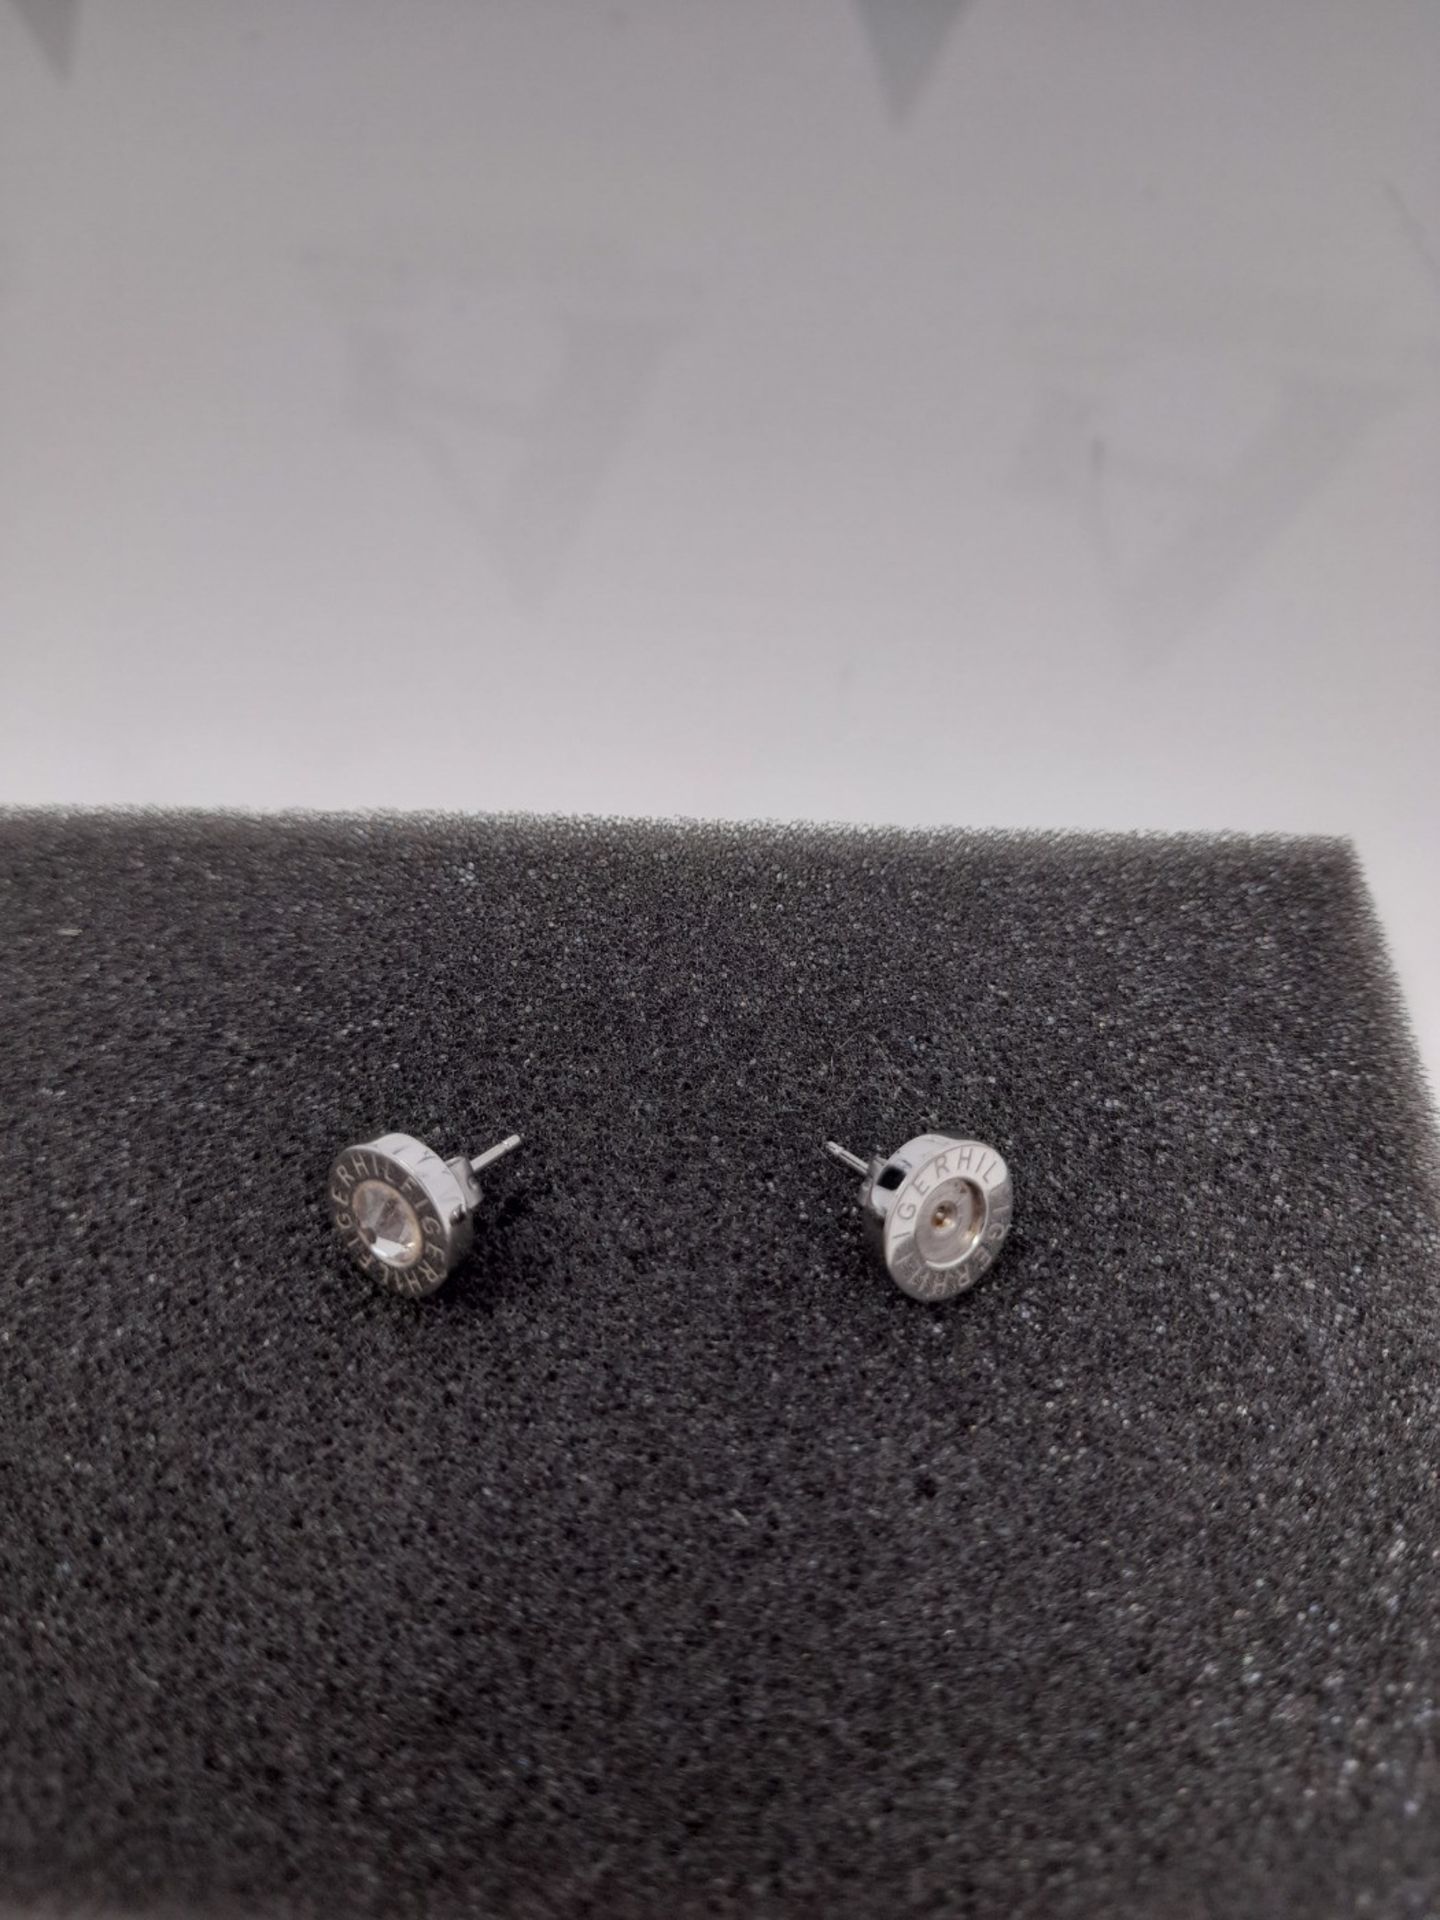 [INCOMPLETE] Tommy Hilfiger jewelry 2700259 Cubic Zirconia Steel Stud Earrings - Image 3 of 3